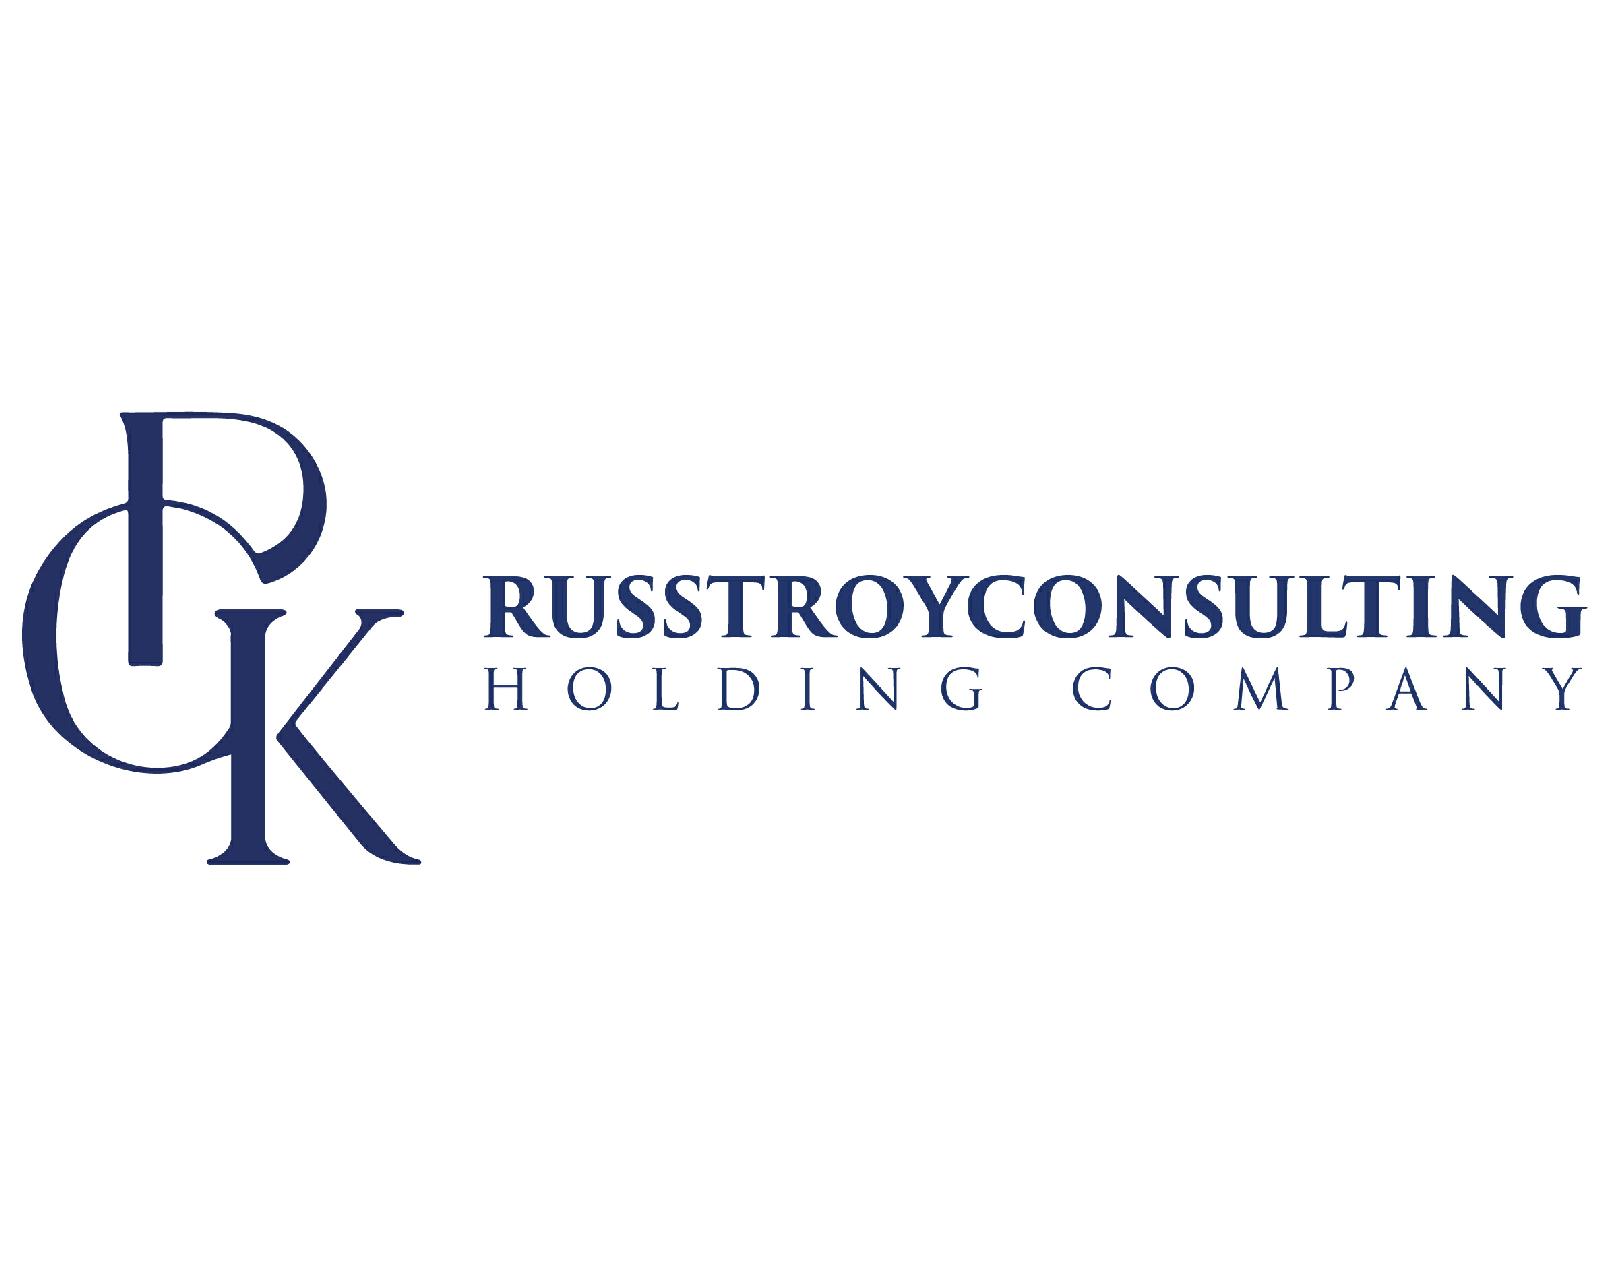 Russtroyconsulting